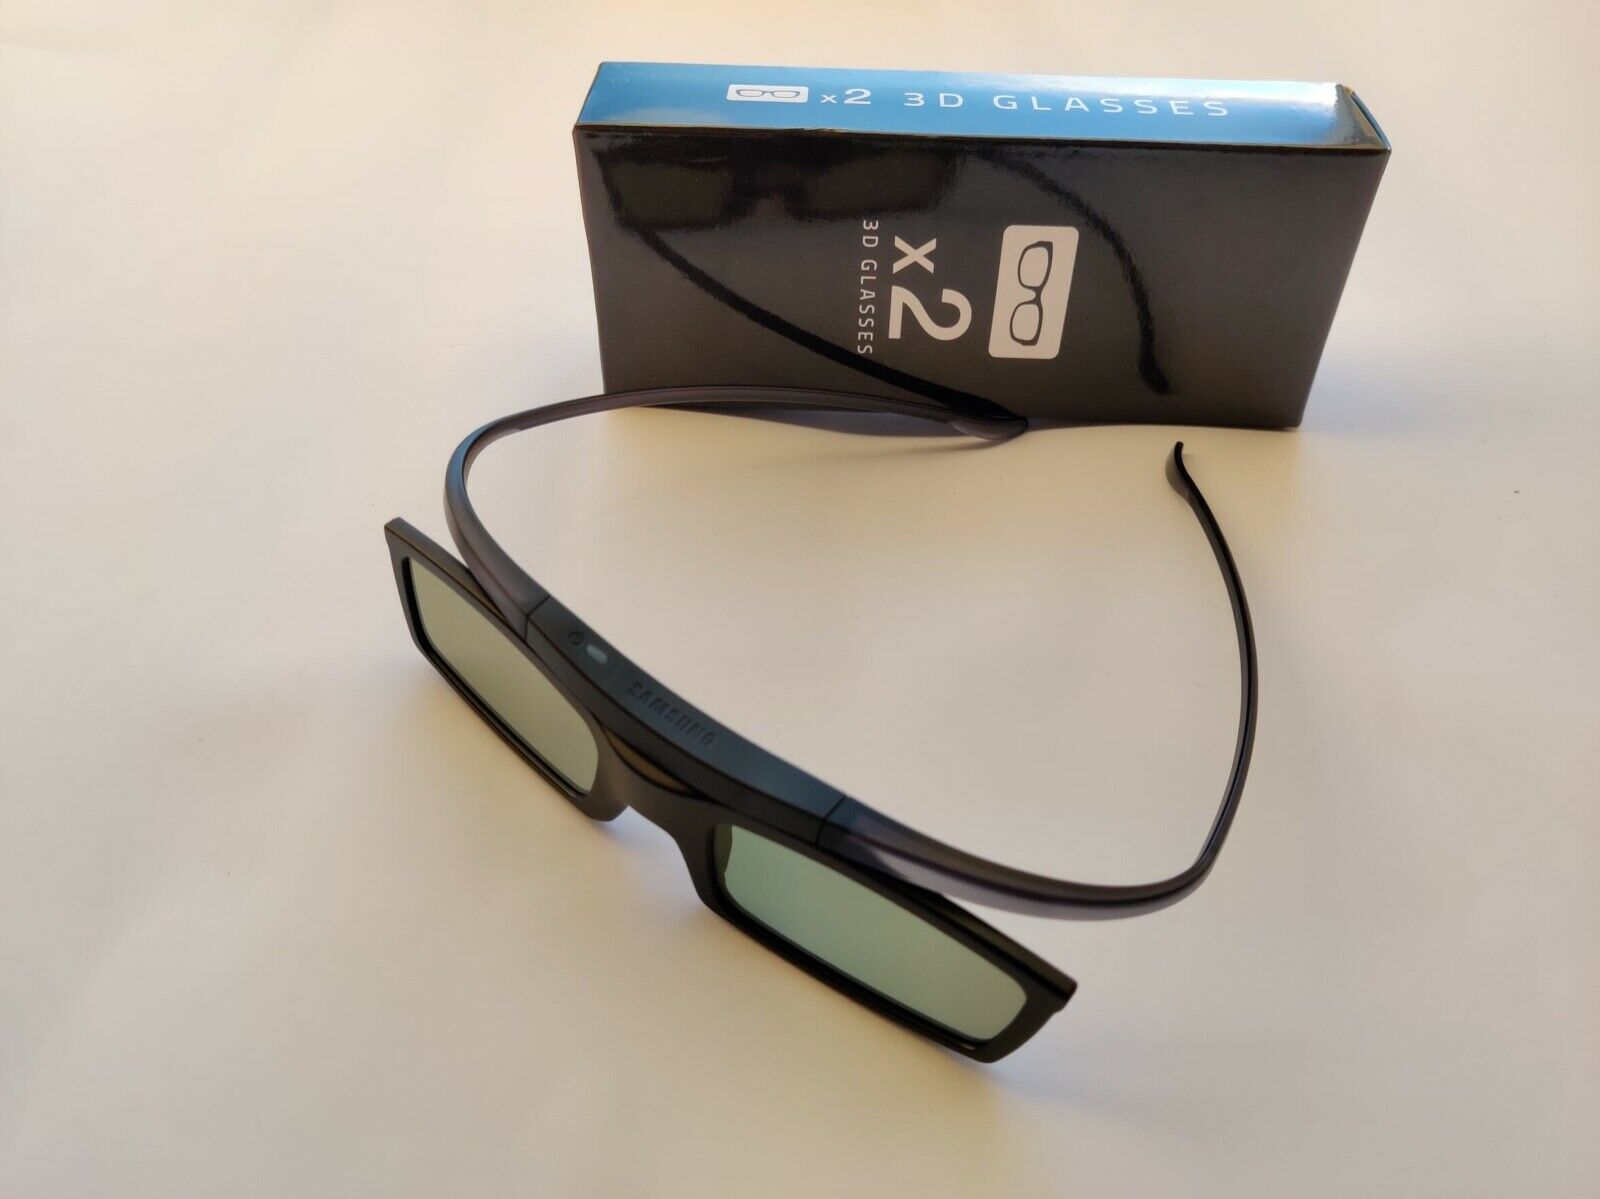  samsung-3d-glasses-What-is-Samsung-3D-Glasses 